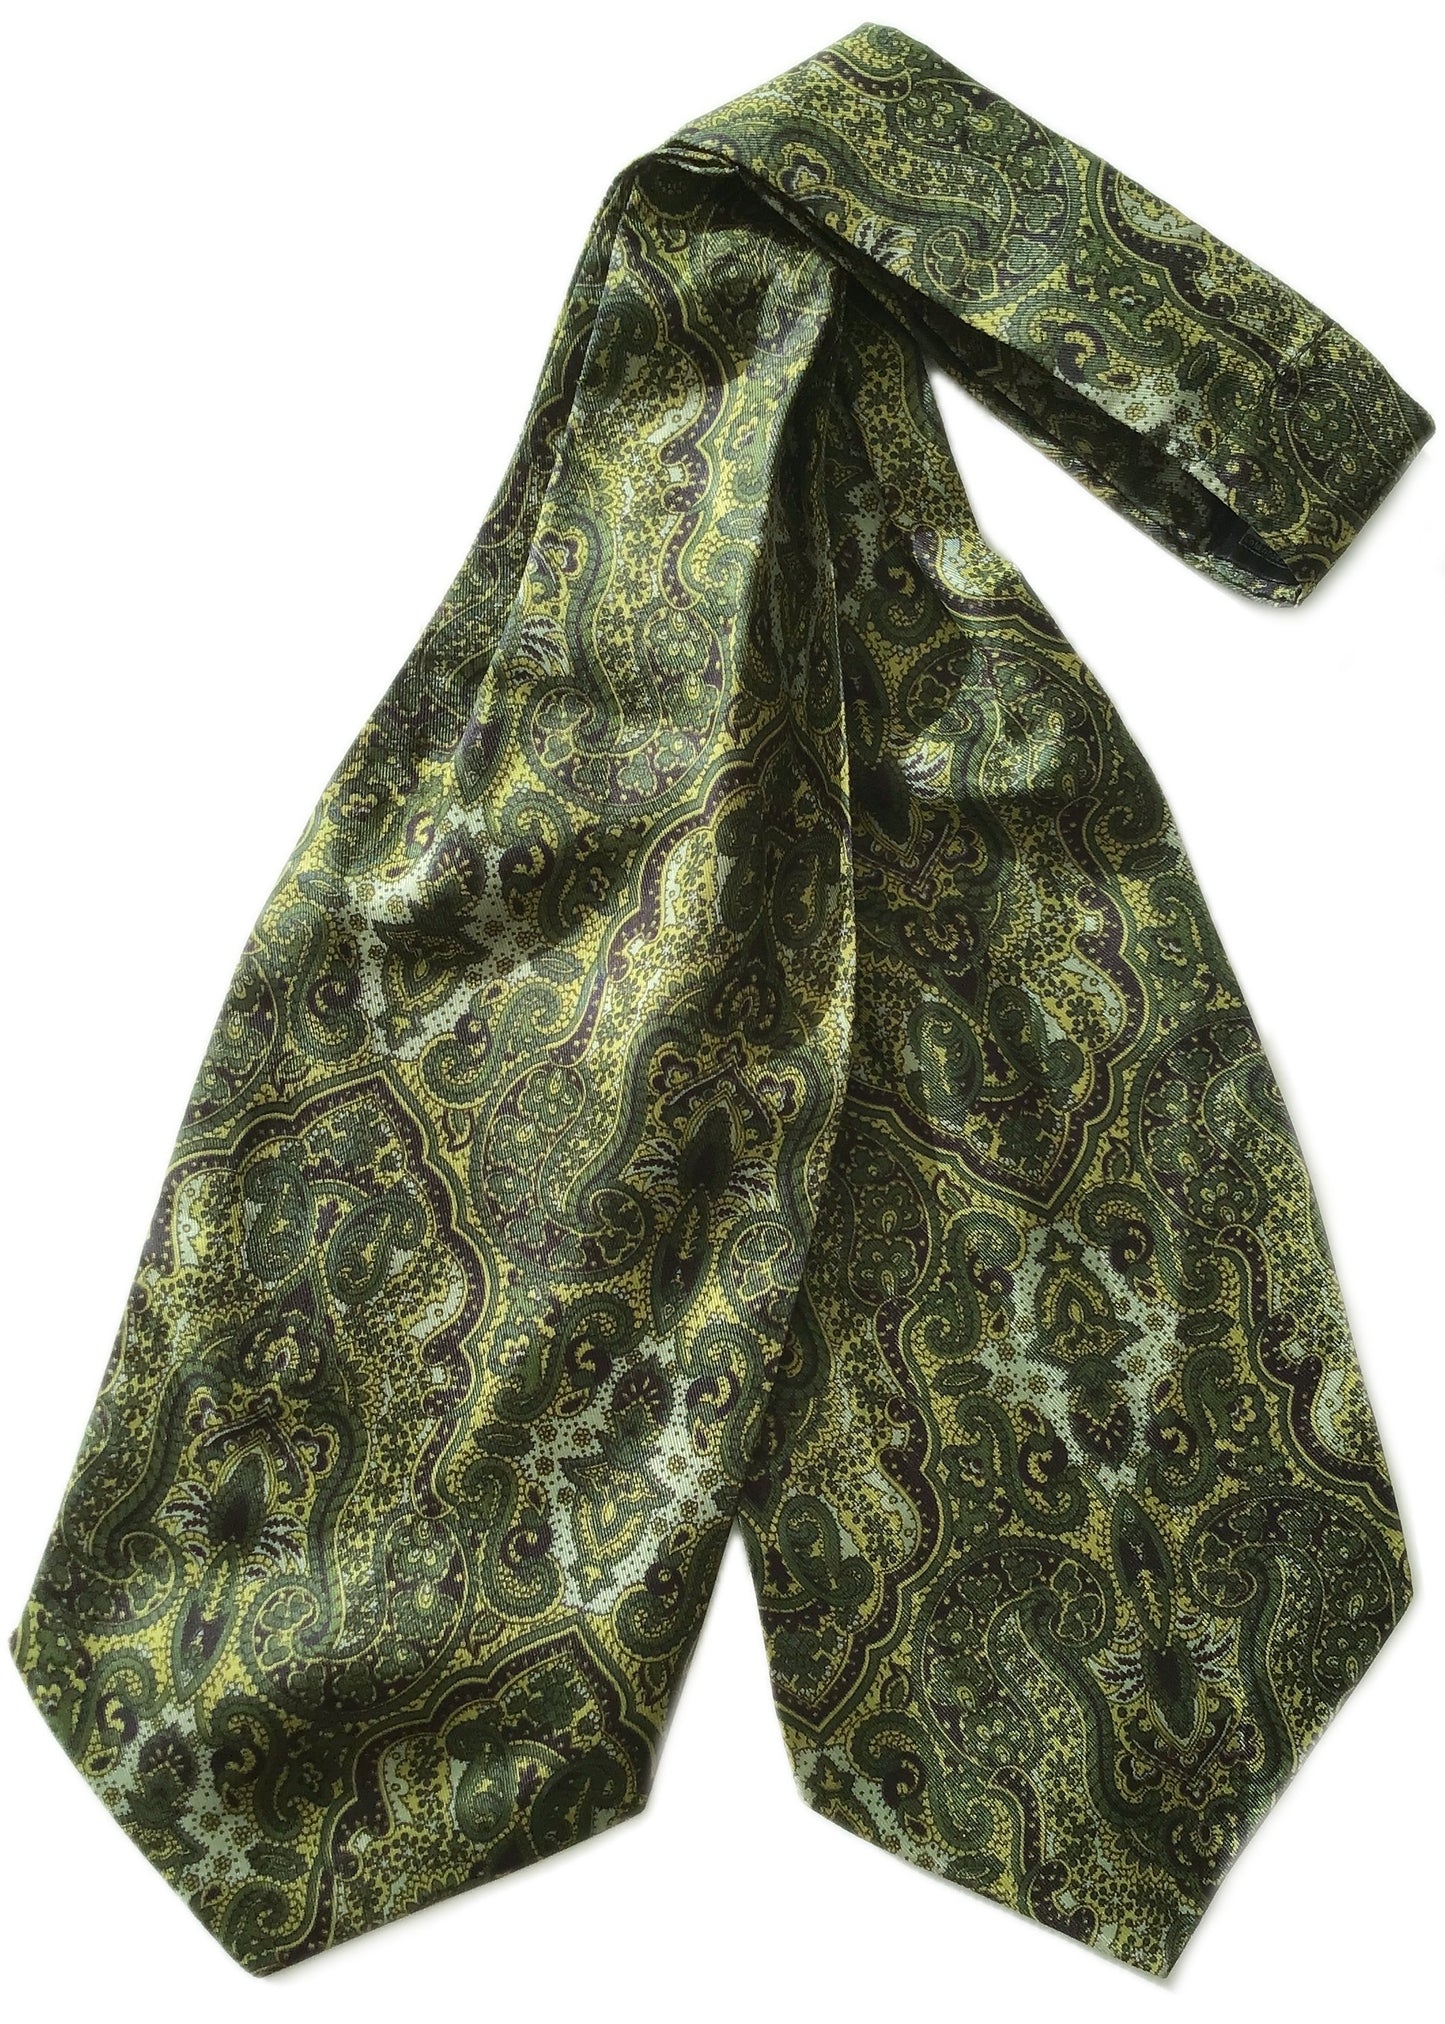 vintage green tootal cravat tie in shades of green